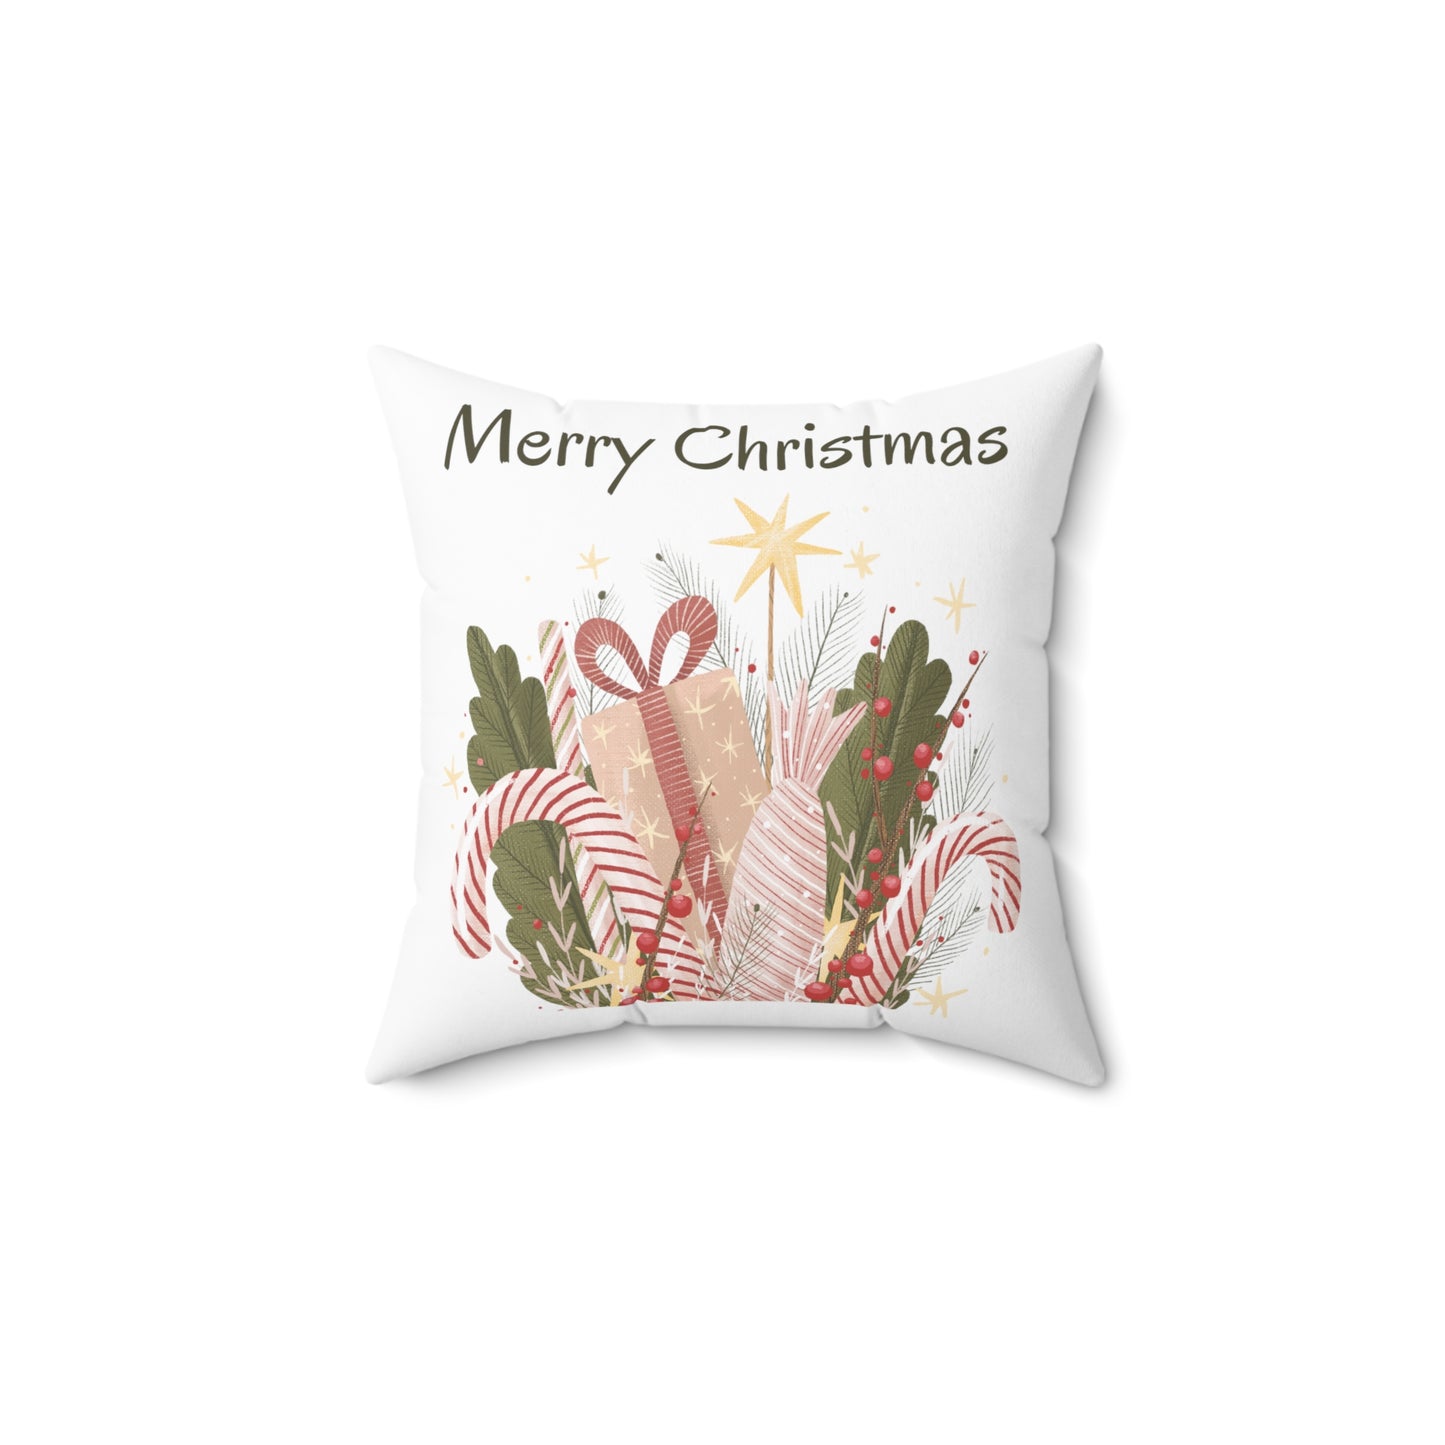 Merry Christma Celebration Printed Polyester Square Pillow